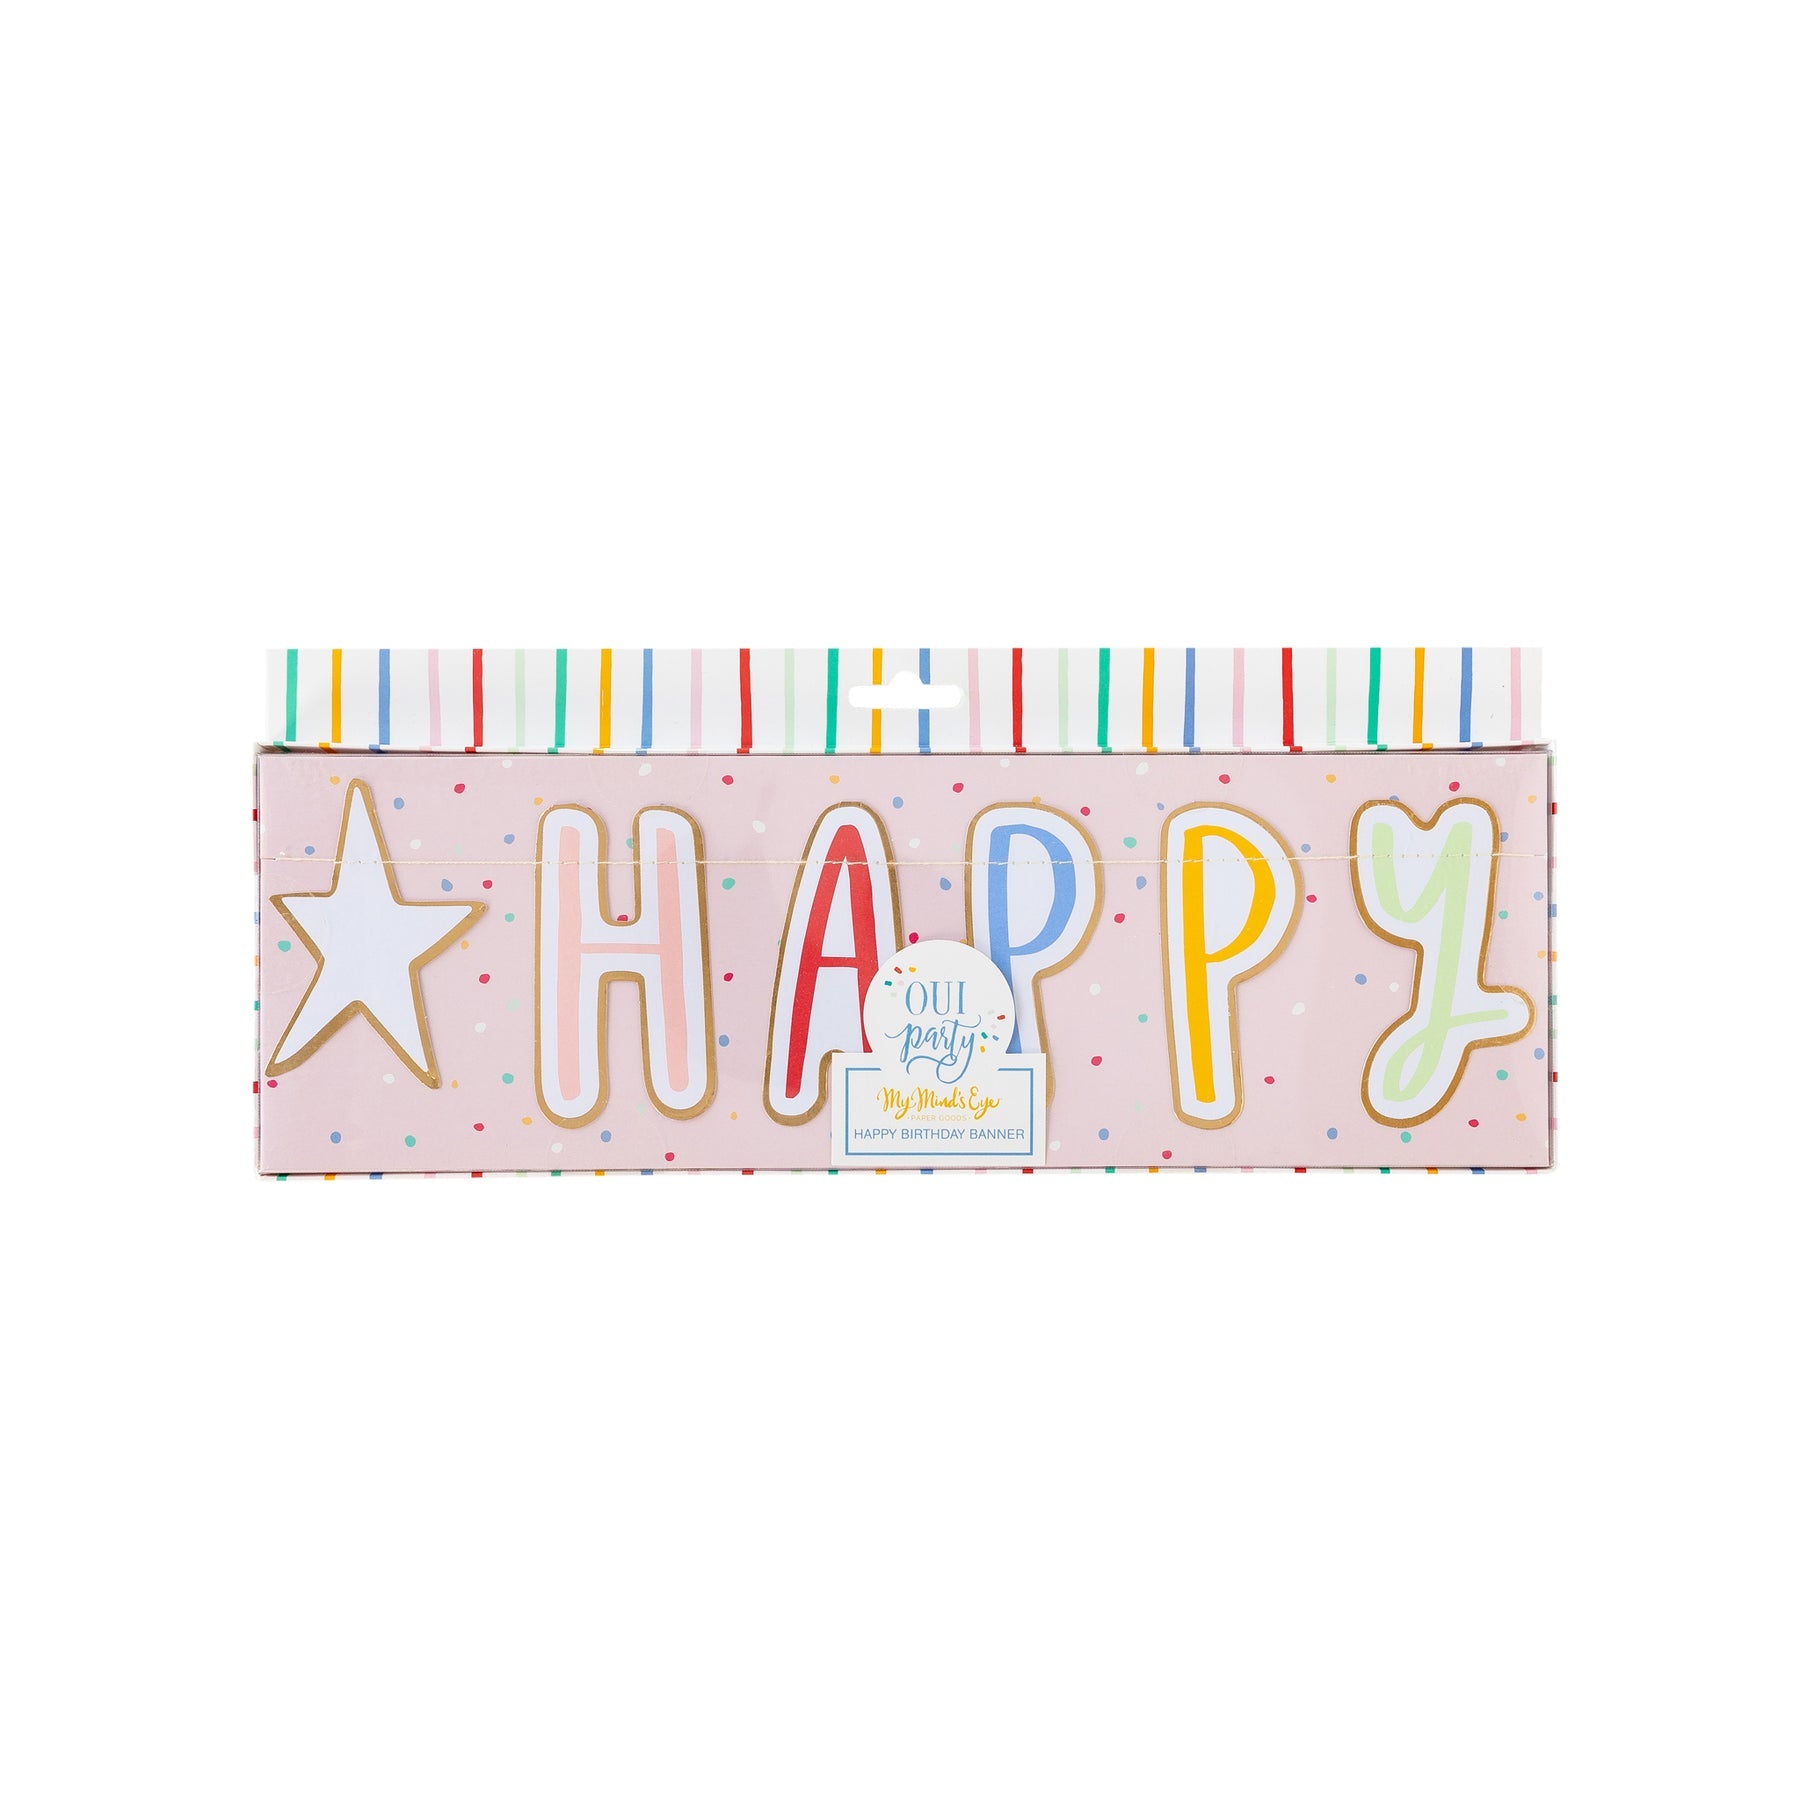 Bubble letter happy birthday banner that is colorful with stars sold at ALittleConfetti, by My Minds Eye.